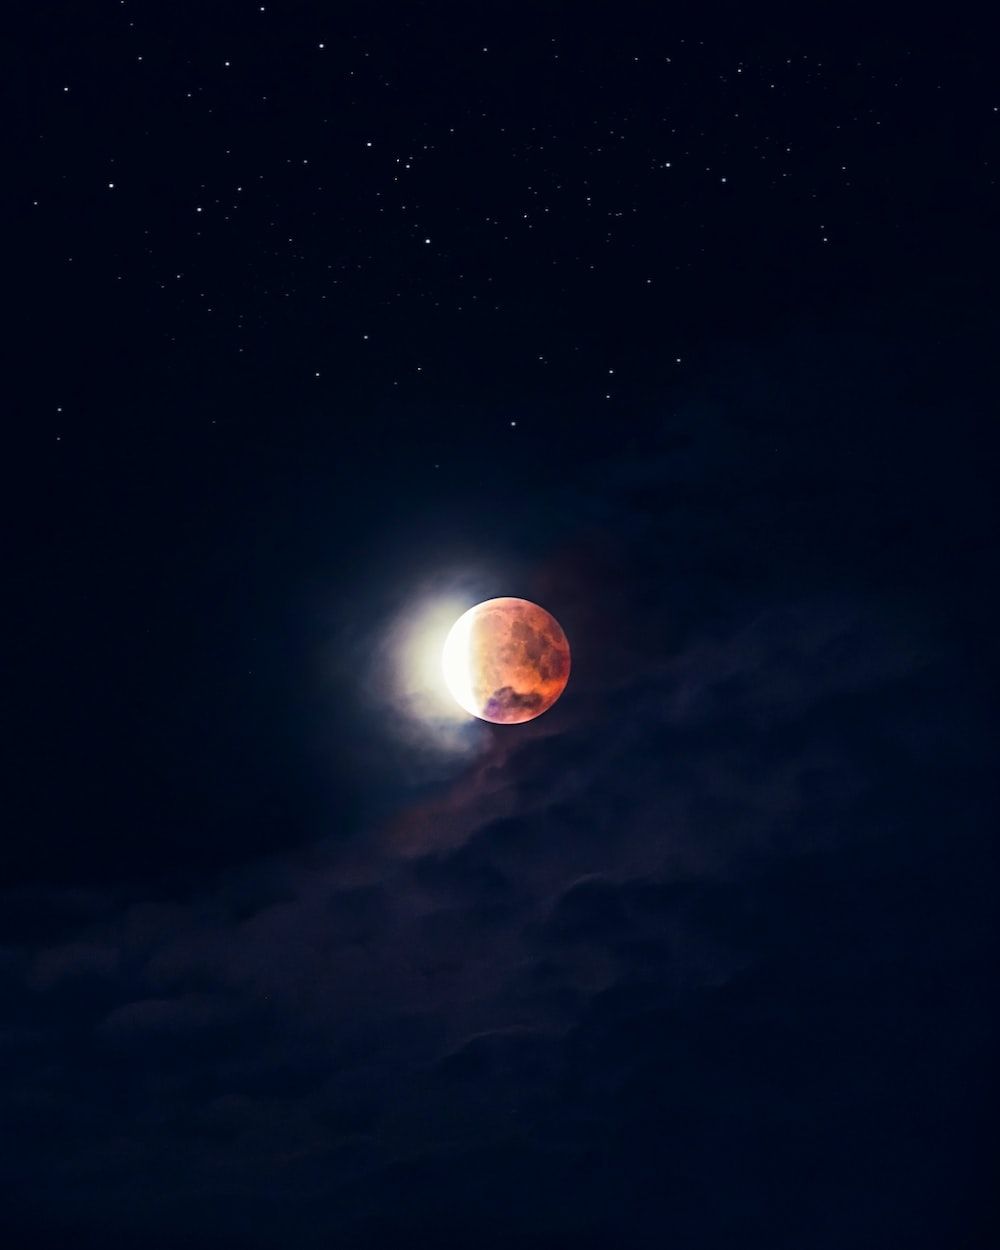 Lunar Eclipse Picture. Download Free Image